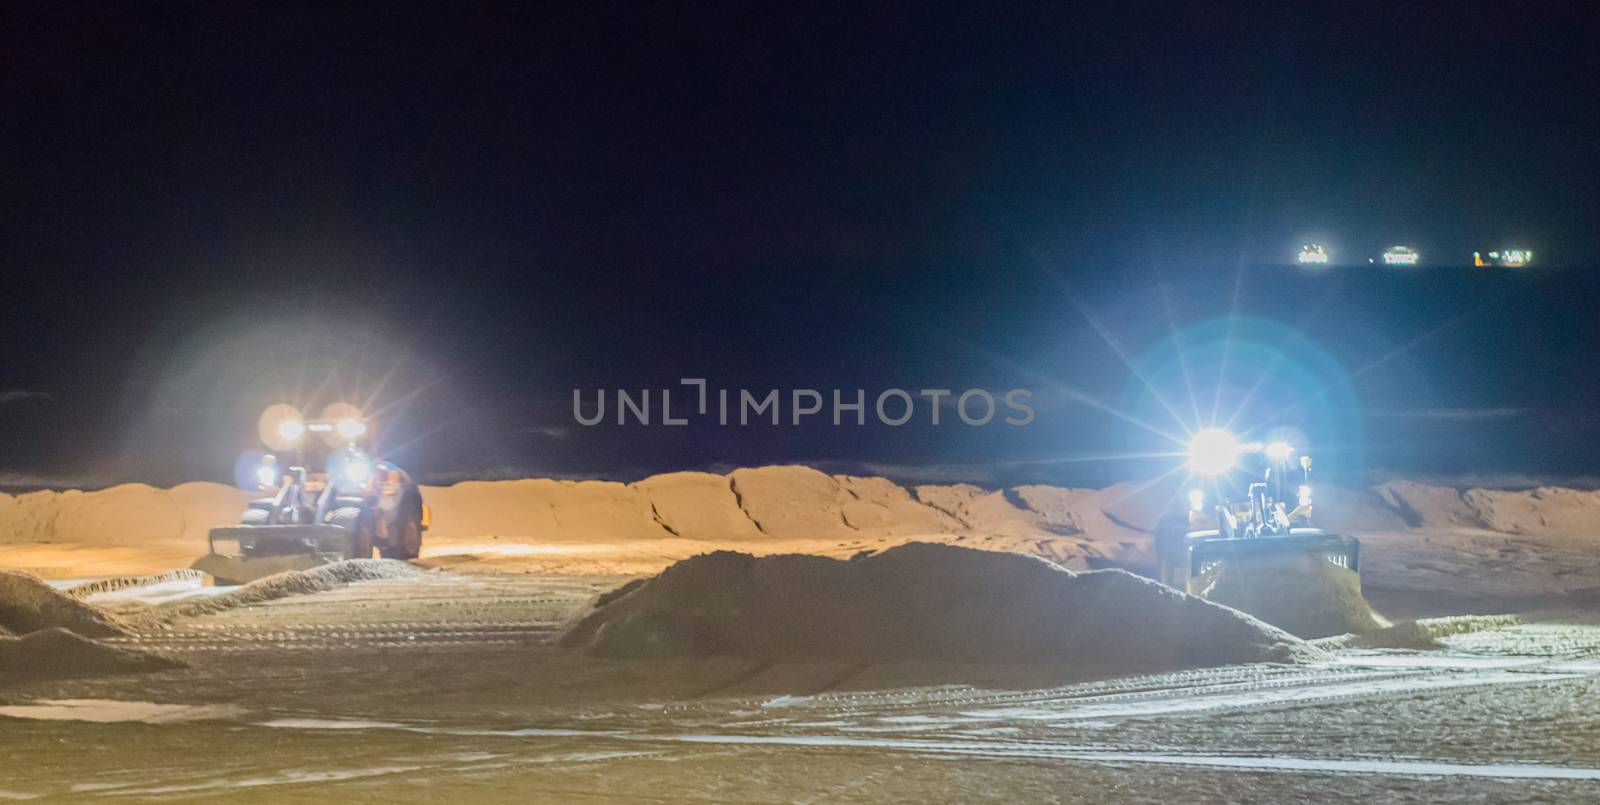 two ground workers working at night in bulldozers at the beach moving the sand by charlottebleijenberg